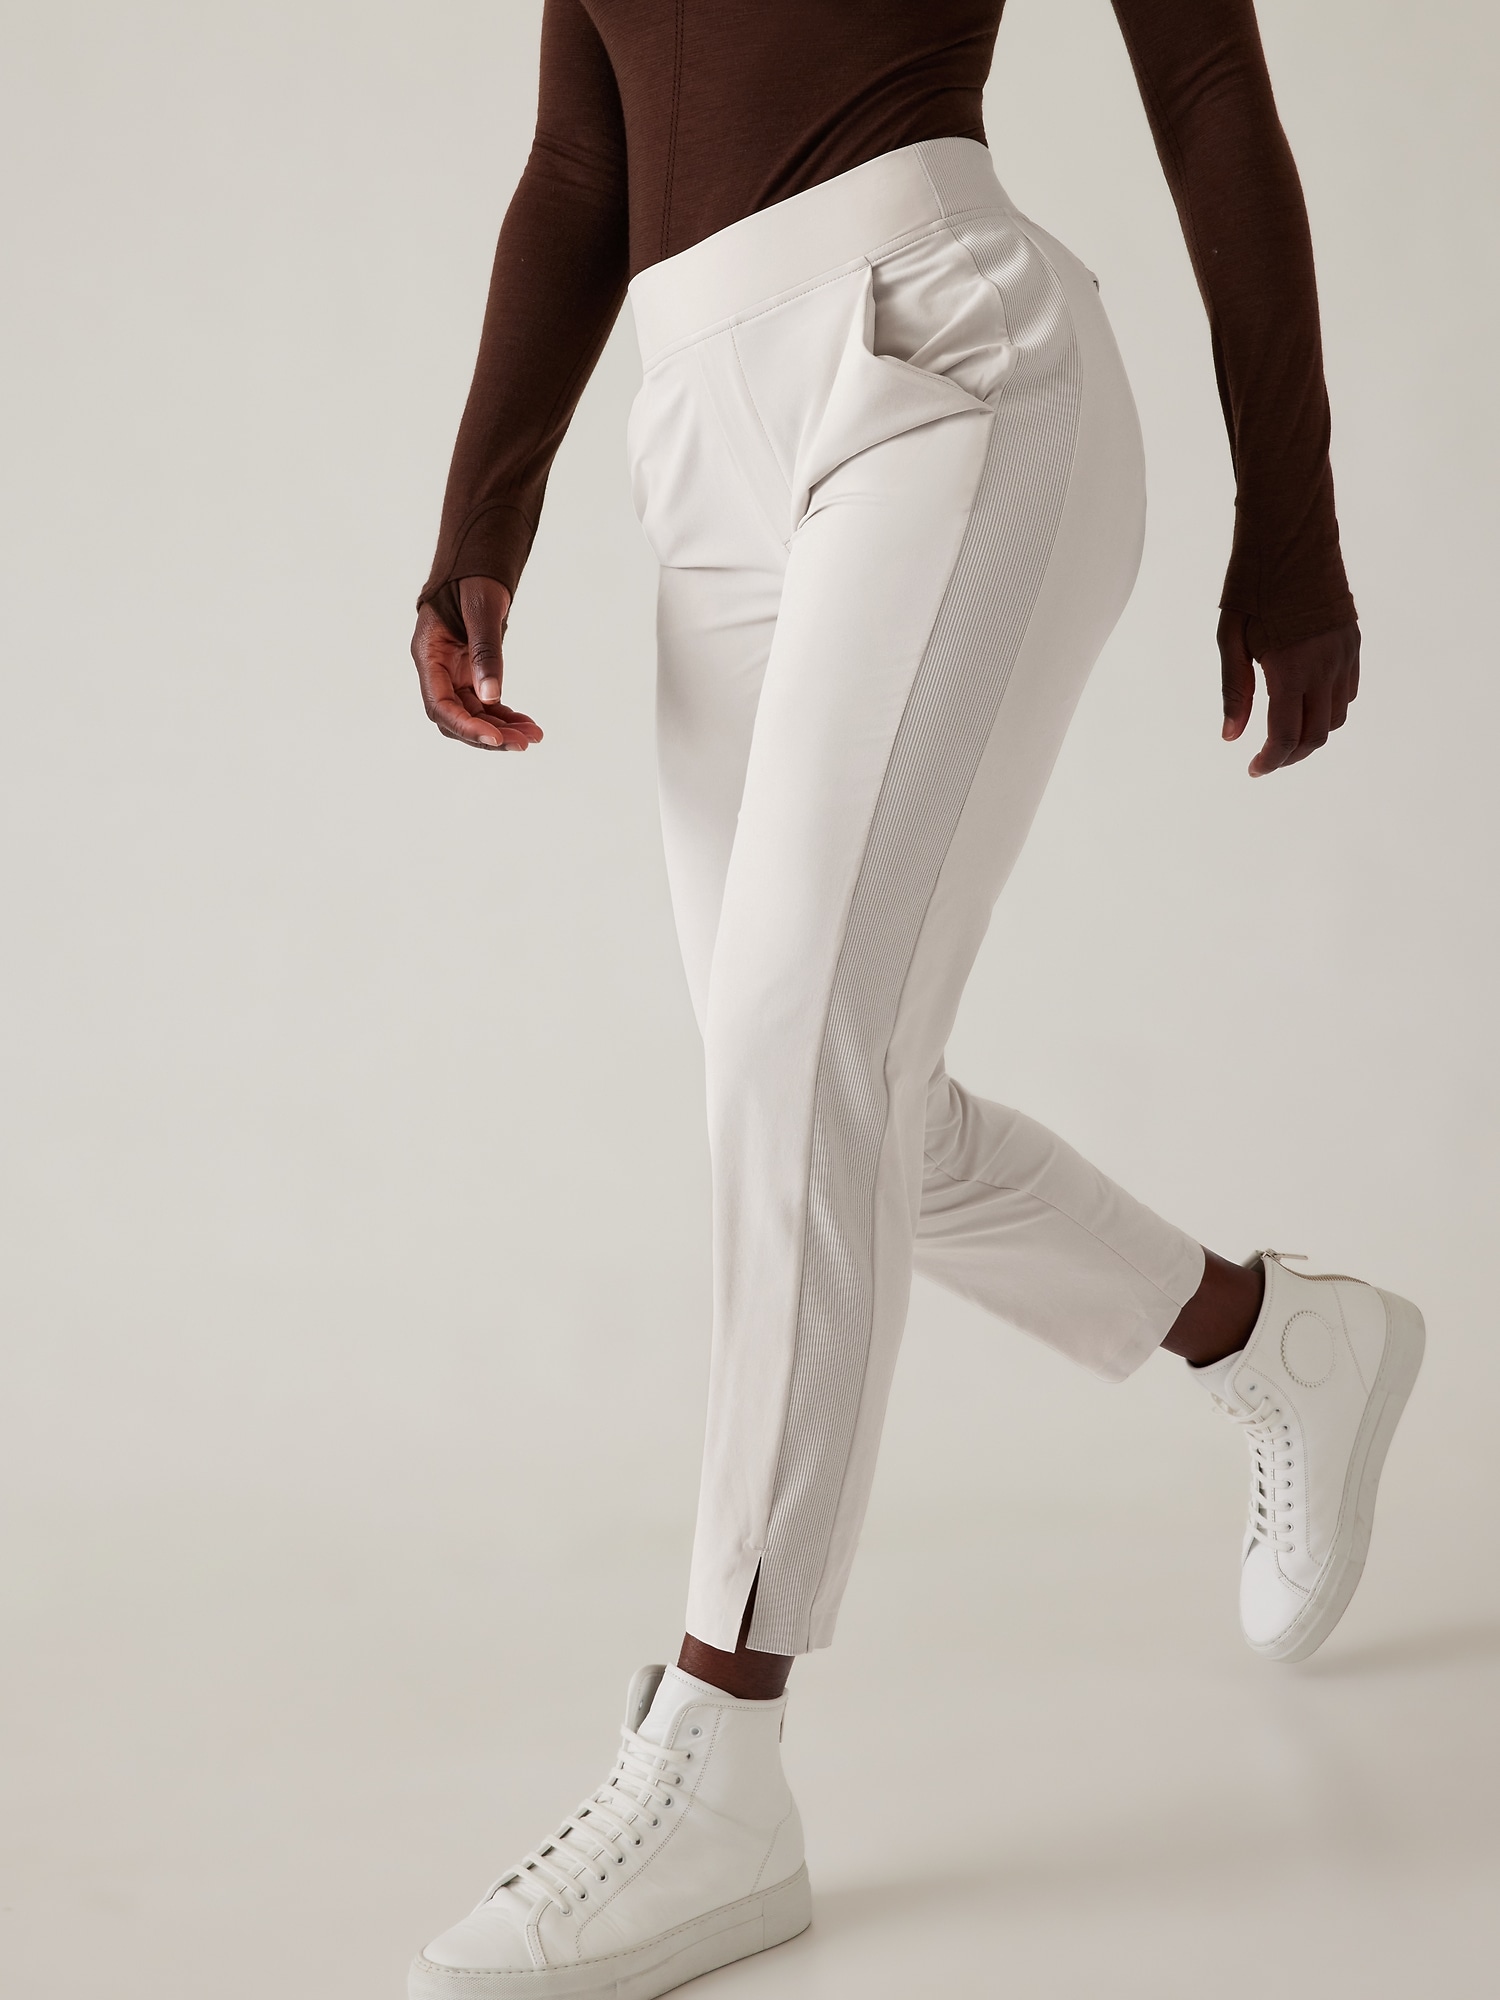 Athleta - Refined and comfort-first with endless ways to wear—meet The  Brooklyn Ankle Pant. Made with Featherweight Stretch fabric, this  bestselling bottom is wrinkle resistant, quick drying, and made with  recycled materials